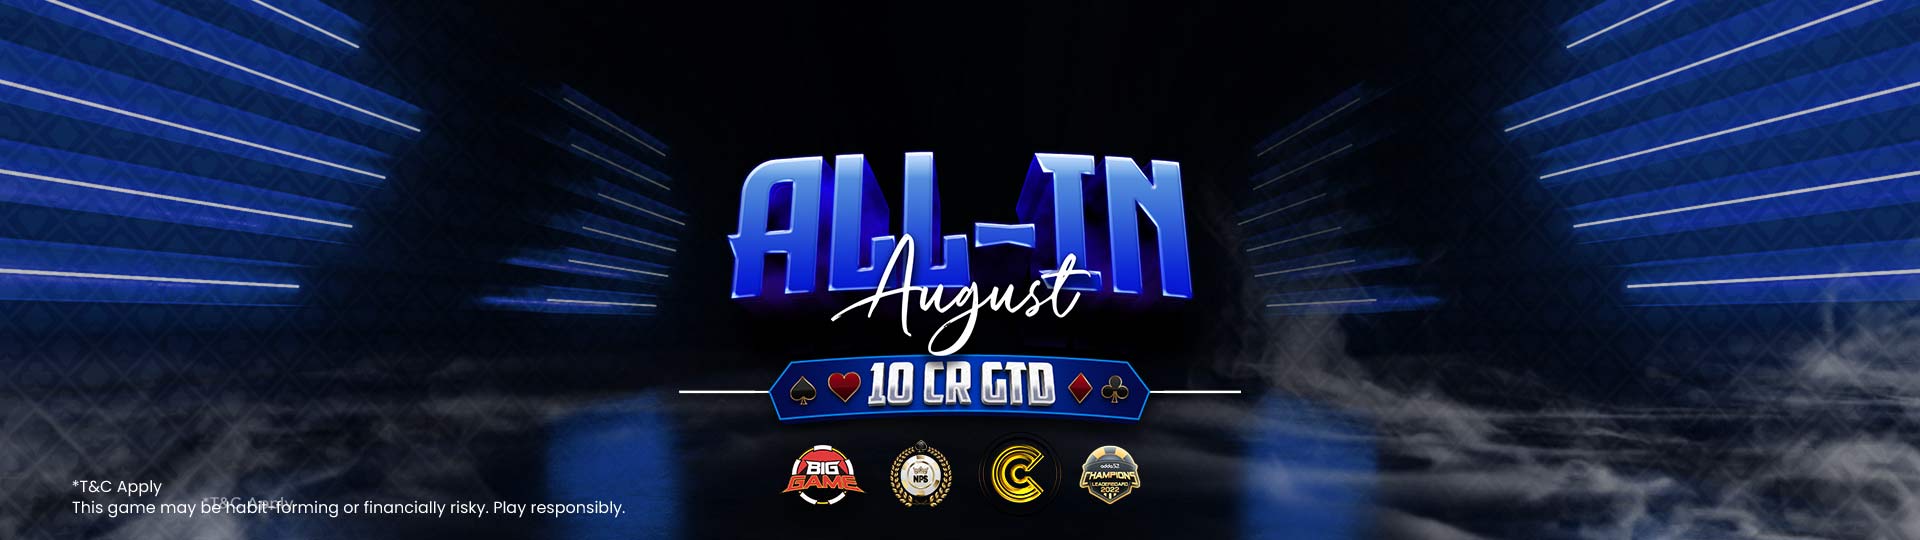 All in August